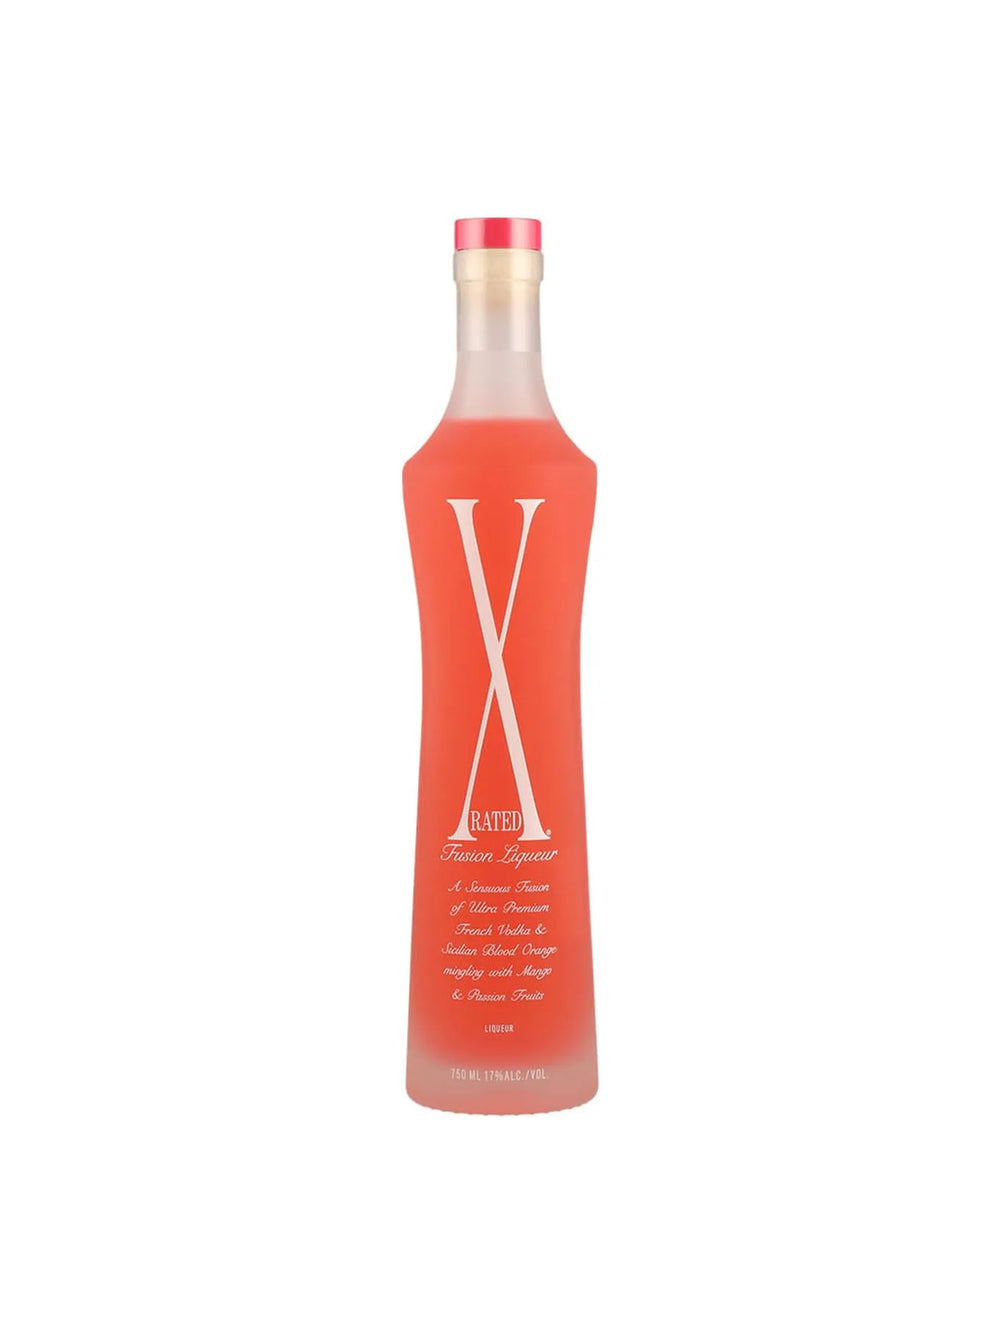 Licor X Rated - 750 Ml